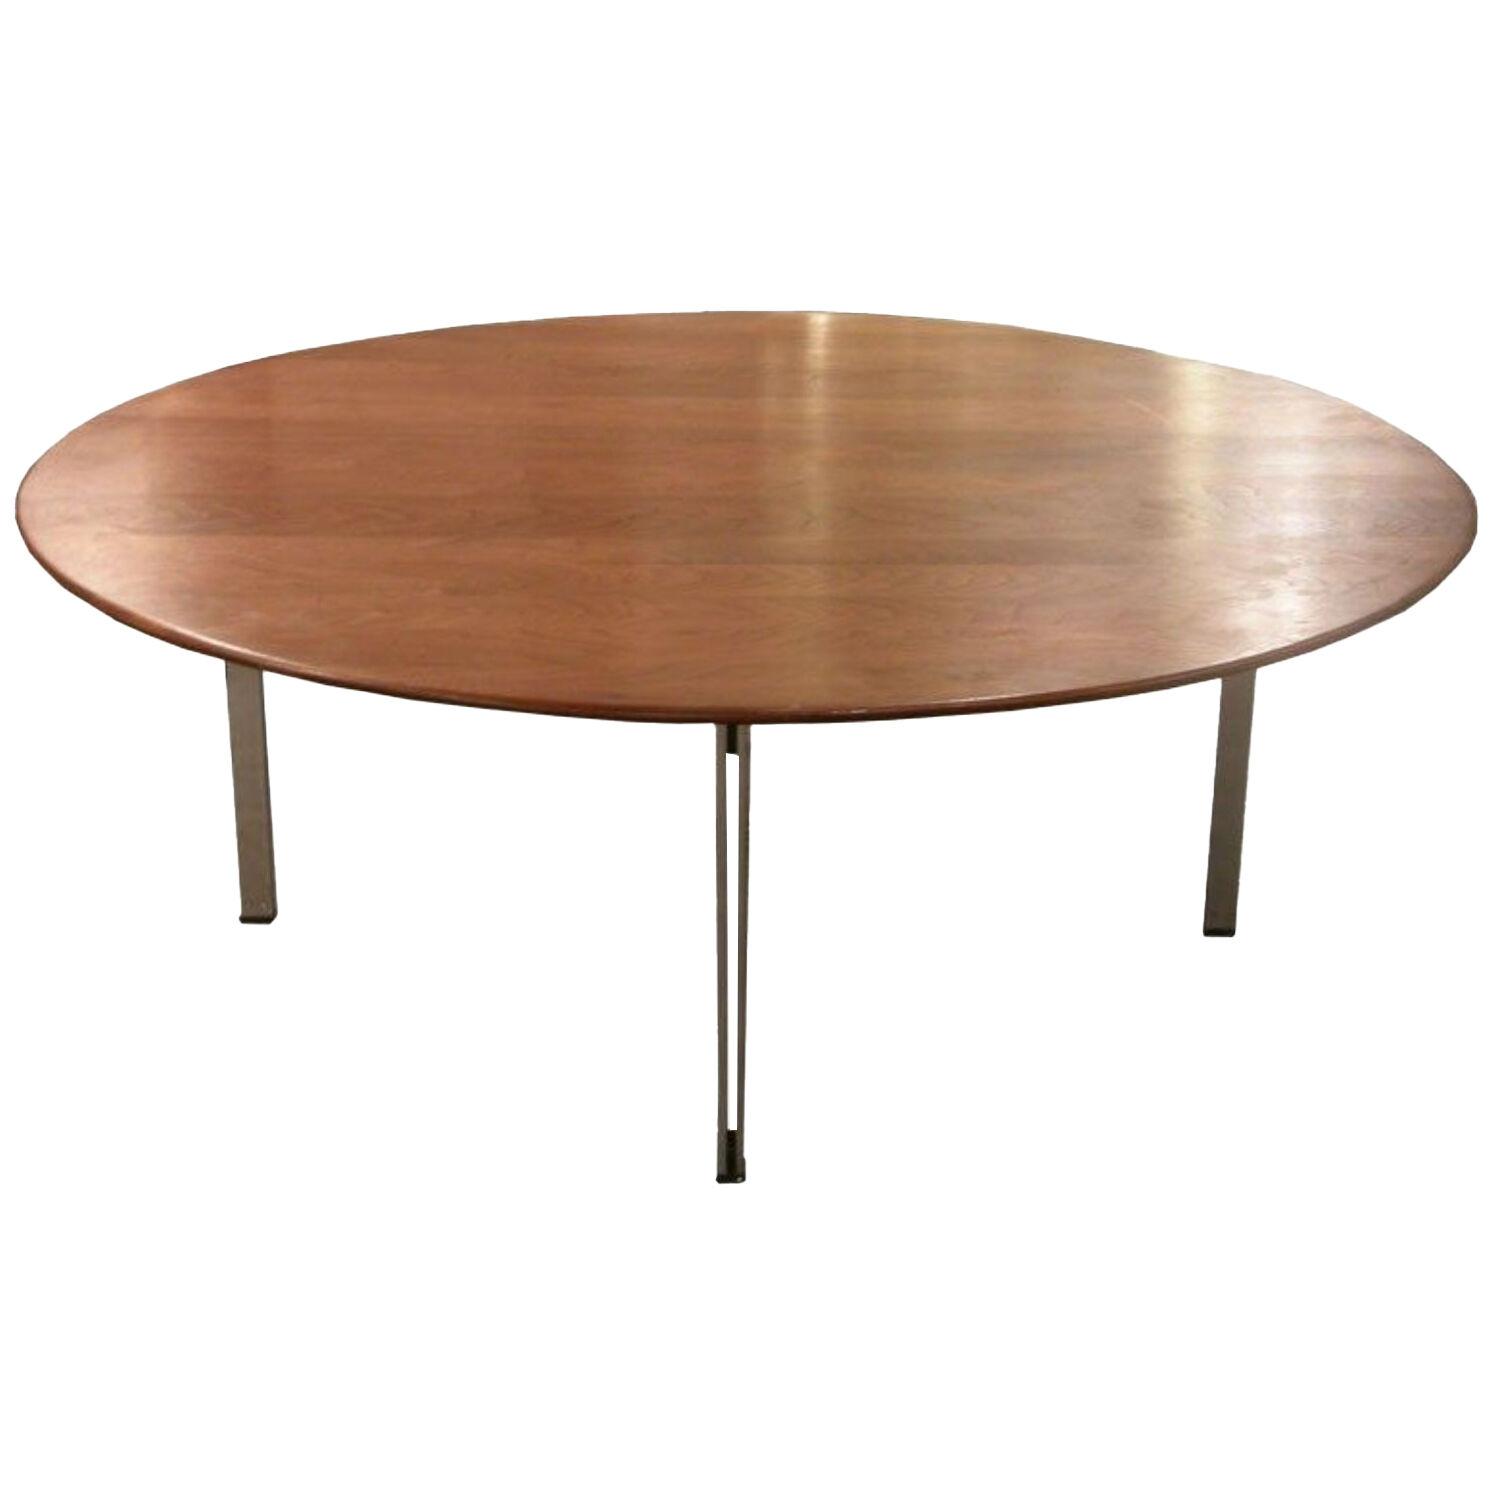 Parallel Bar Walnut Cocktail Table by Florence Knoll for Knoll